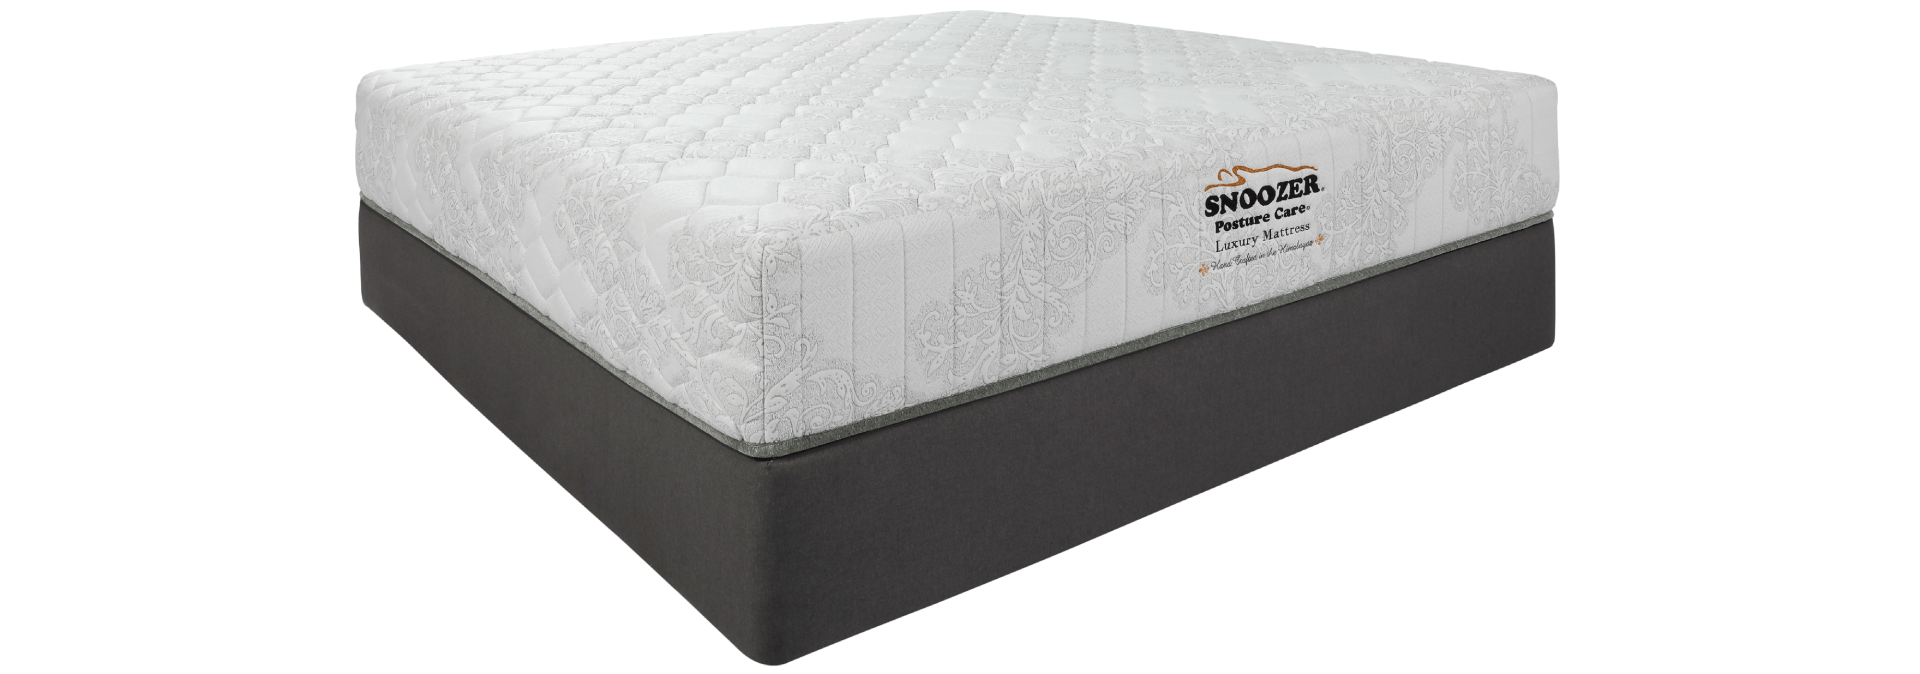 best mattress for back support and comfort